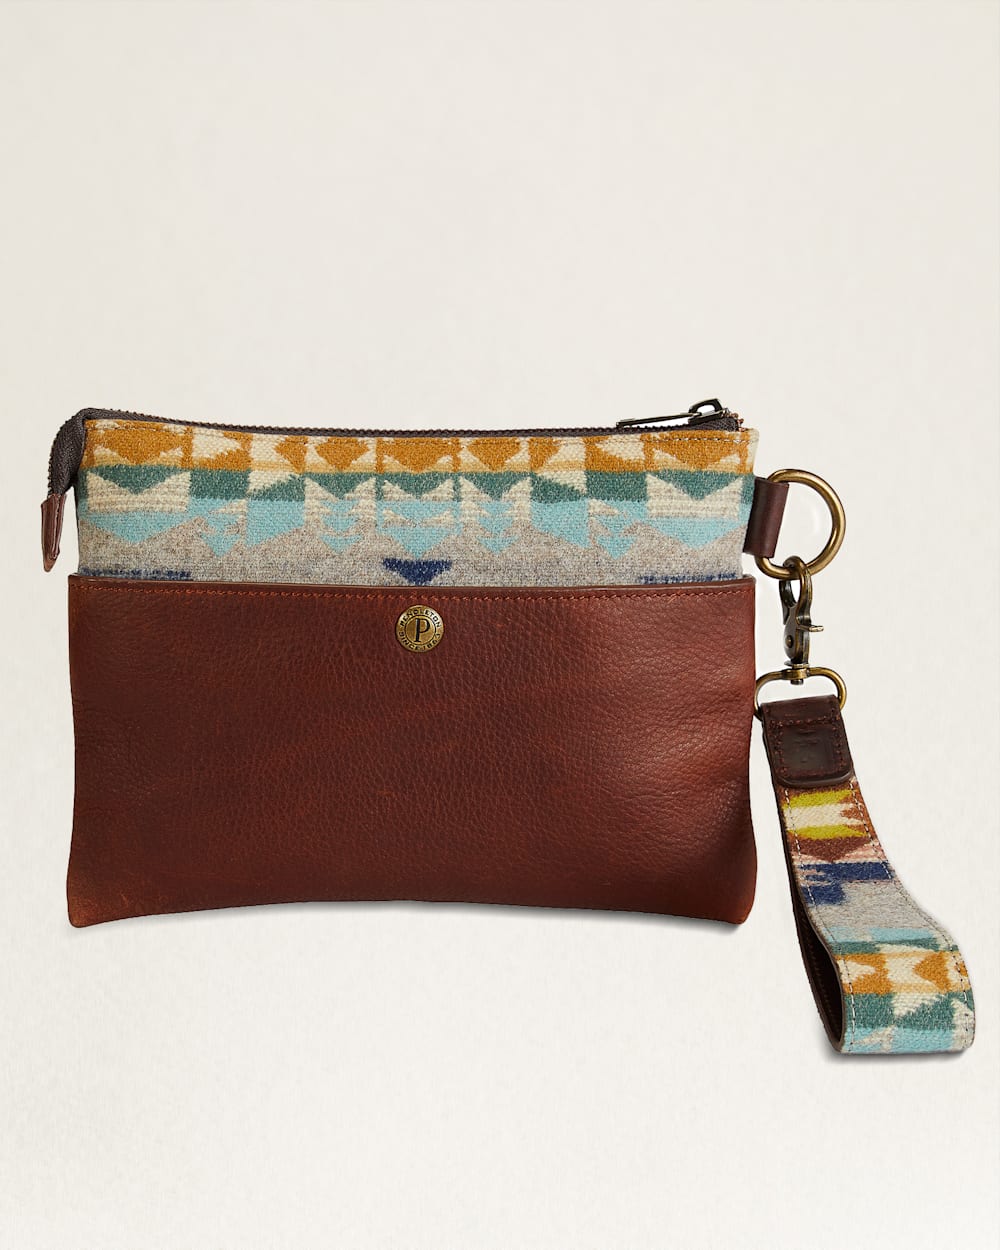 ALTERNATE VIEW OF DESERT DAWN WOOL/LEATHER CLUTCH IN TAN MIX image number 2